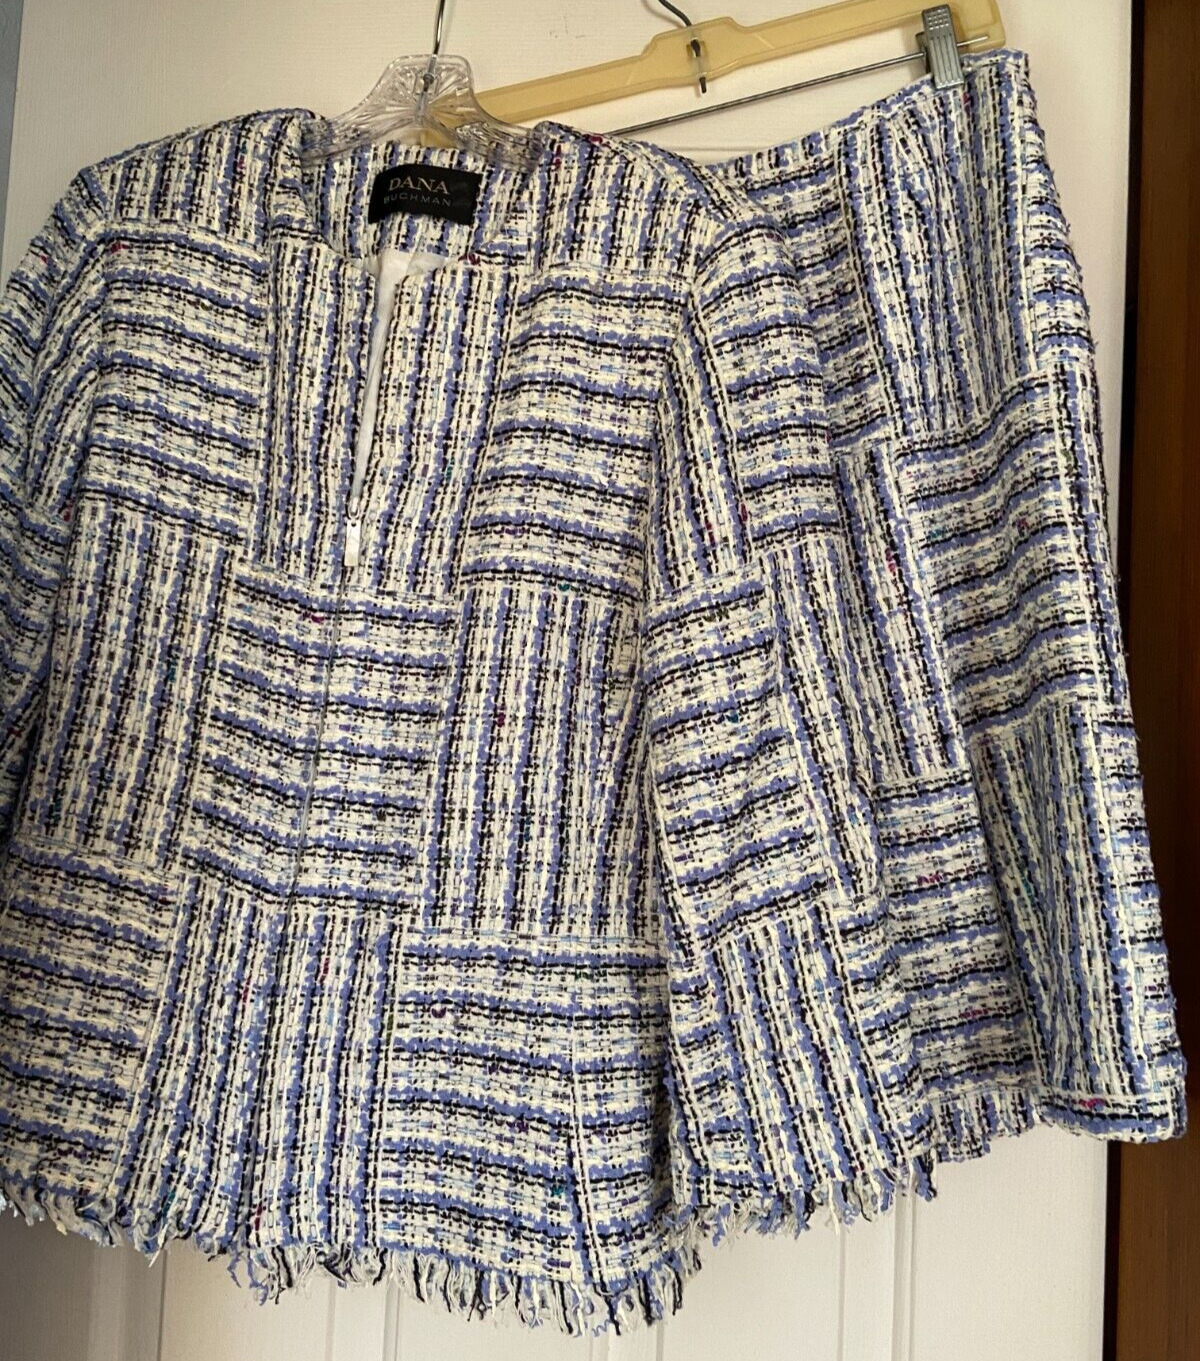 COTTON SKIRT SUIT IN BLUE WHITE IN BASKET WEAVE BY DANA BUCHMAN AUTHENTIC 14-12